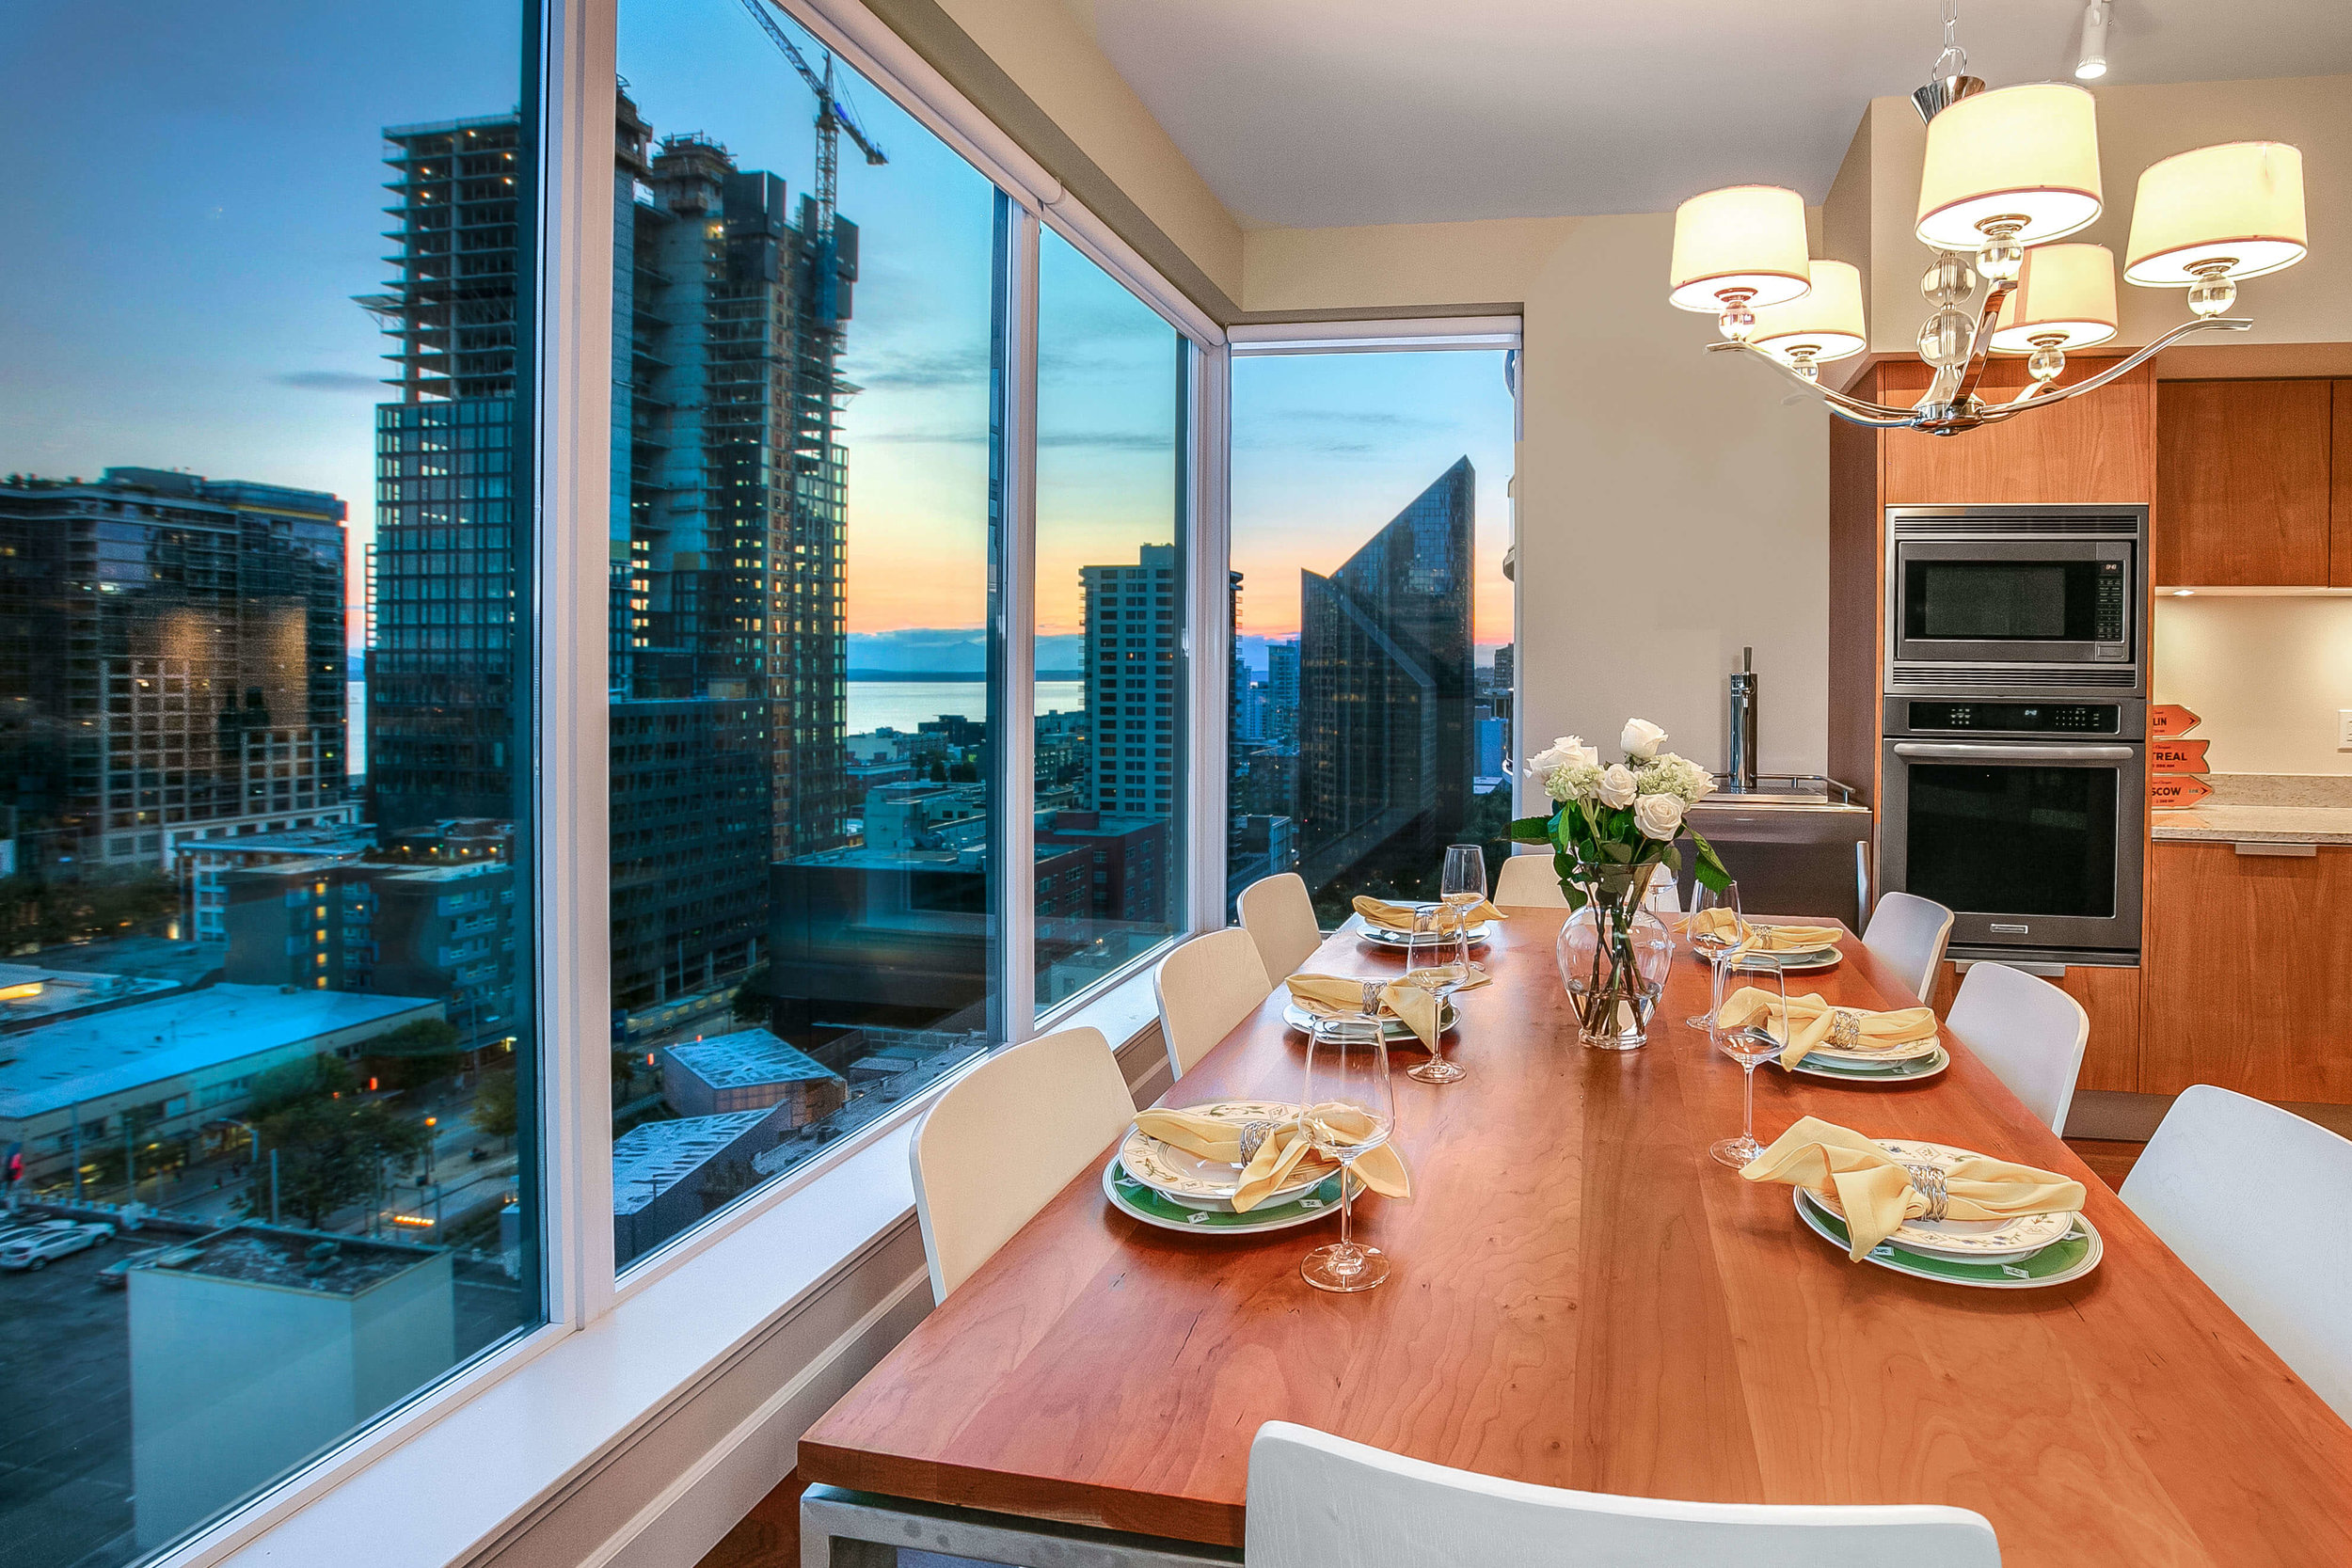 Escala-Luxury-Condo-For-Sale-Downtown-Seattle-Dining-Views.jpg